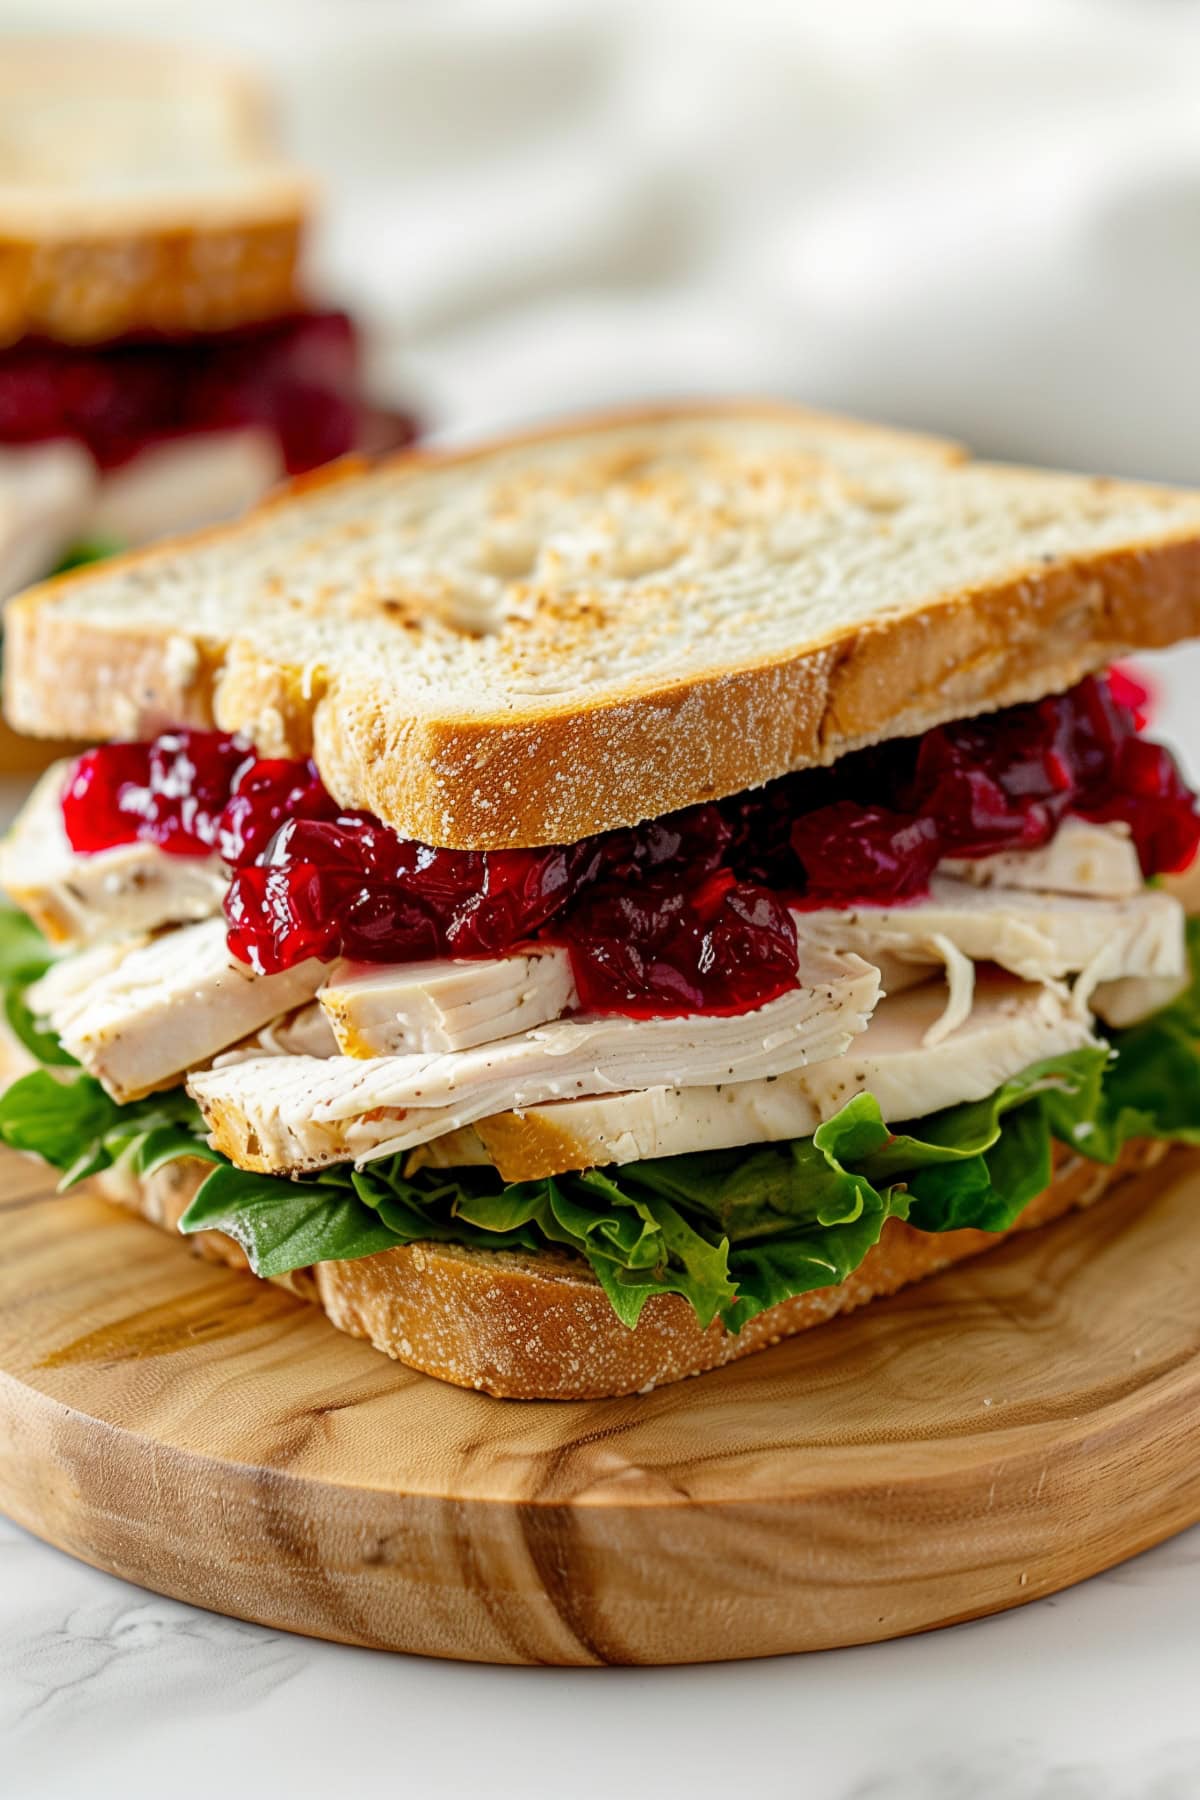 A delicious sandwich featuring sliced turkey, cranberry sauce and green lettuce